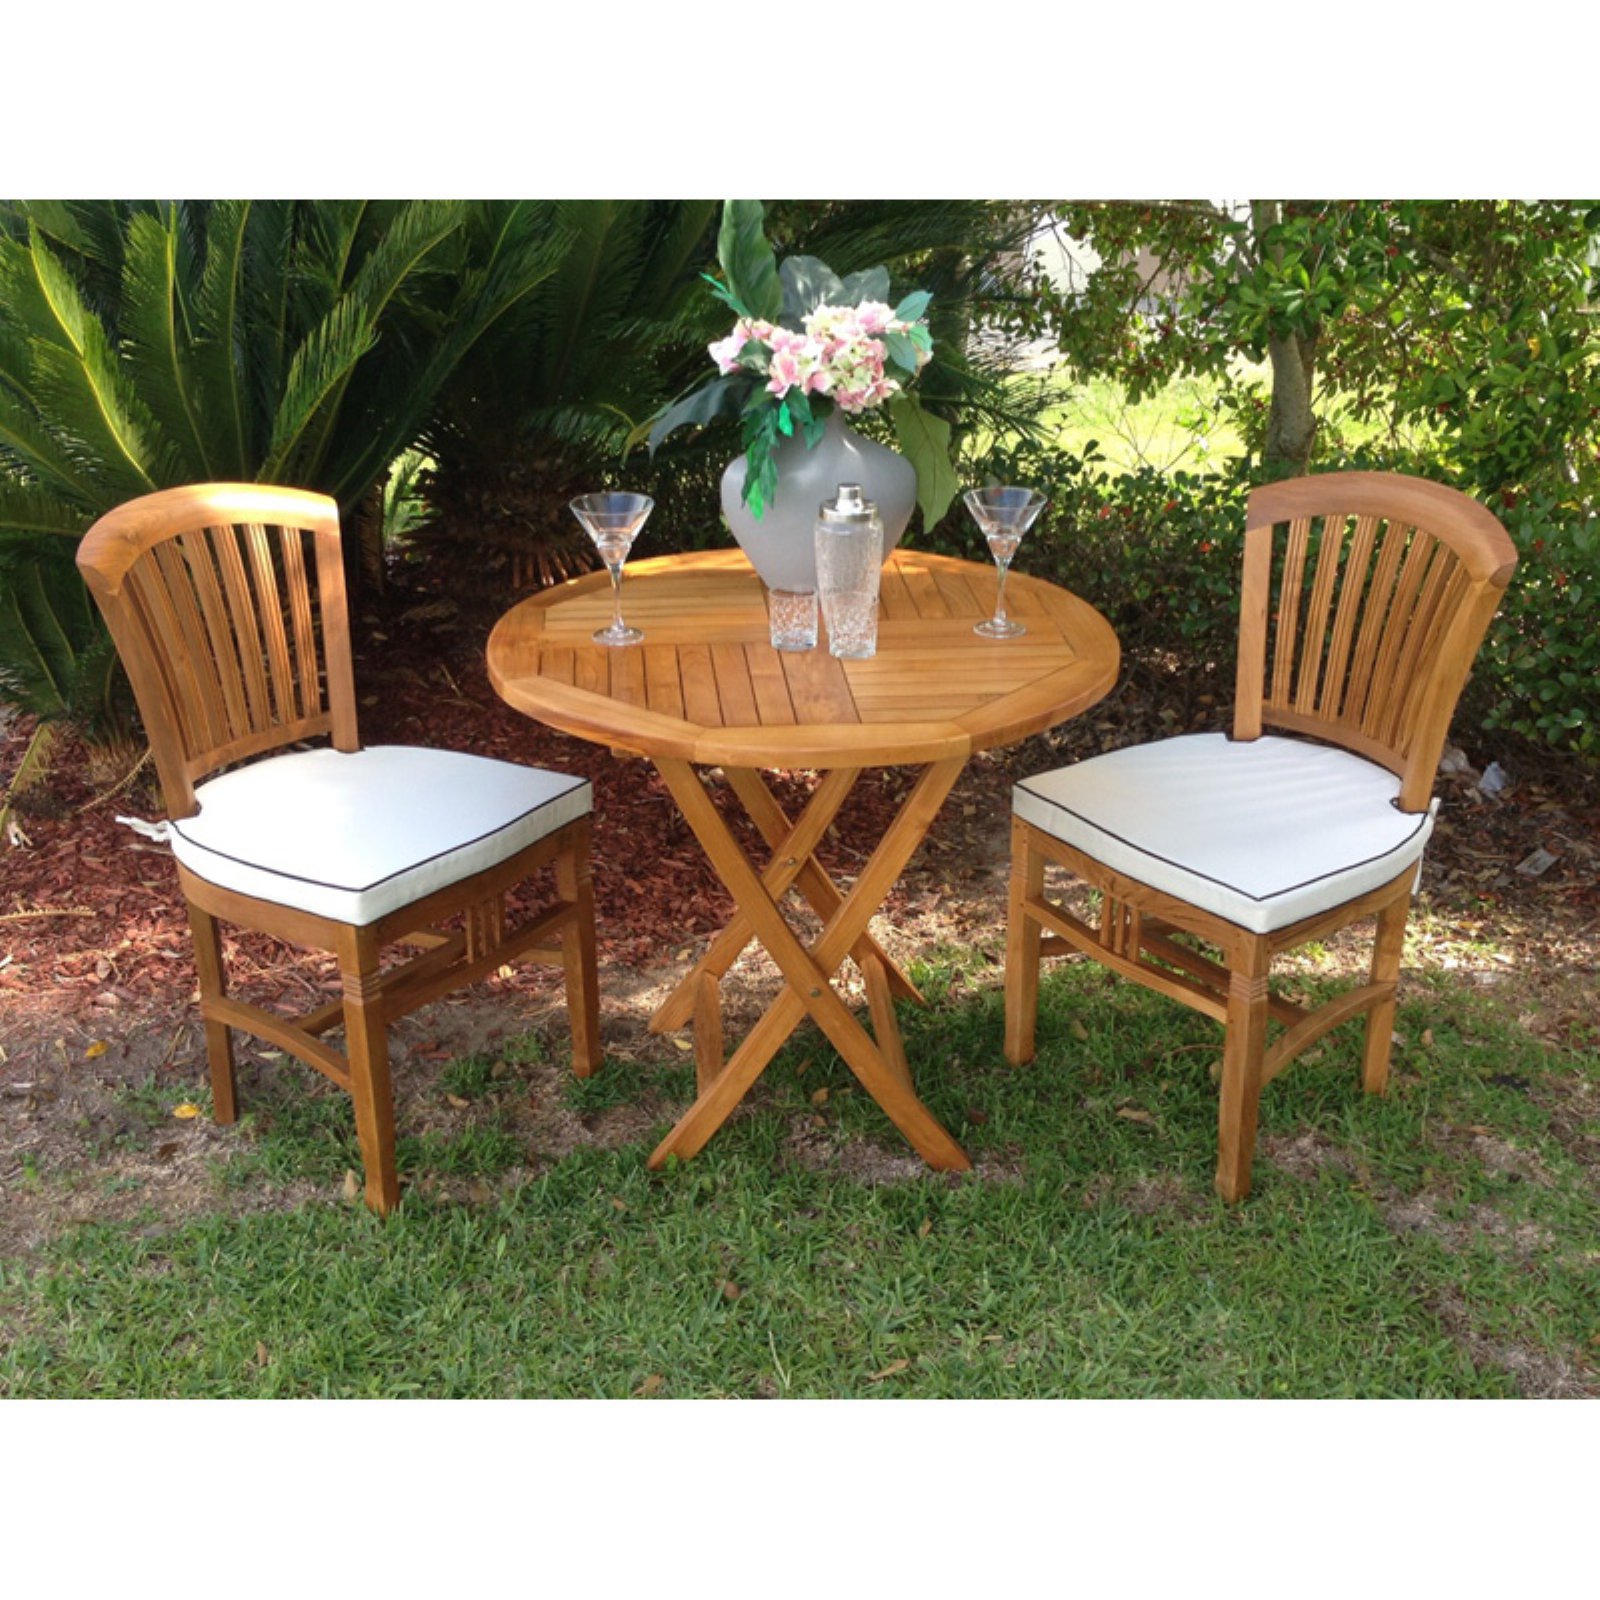 Chic Teak Orleans 3 Piece Patio Bistro Set with Optional Cushions - image 1 of 6